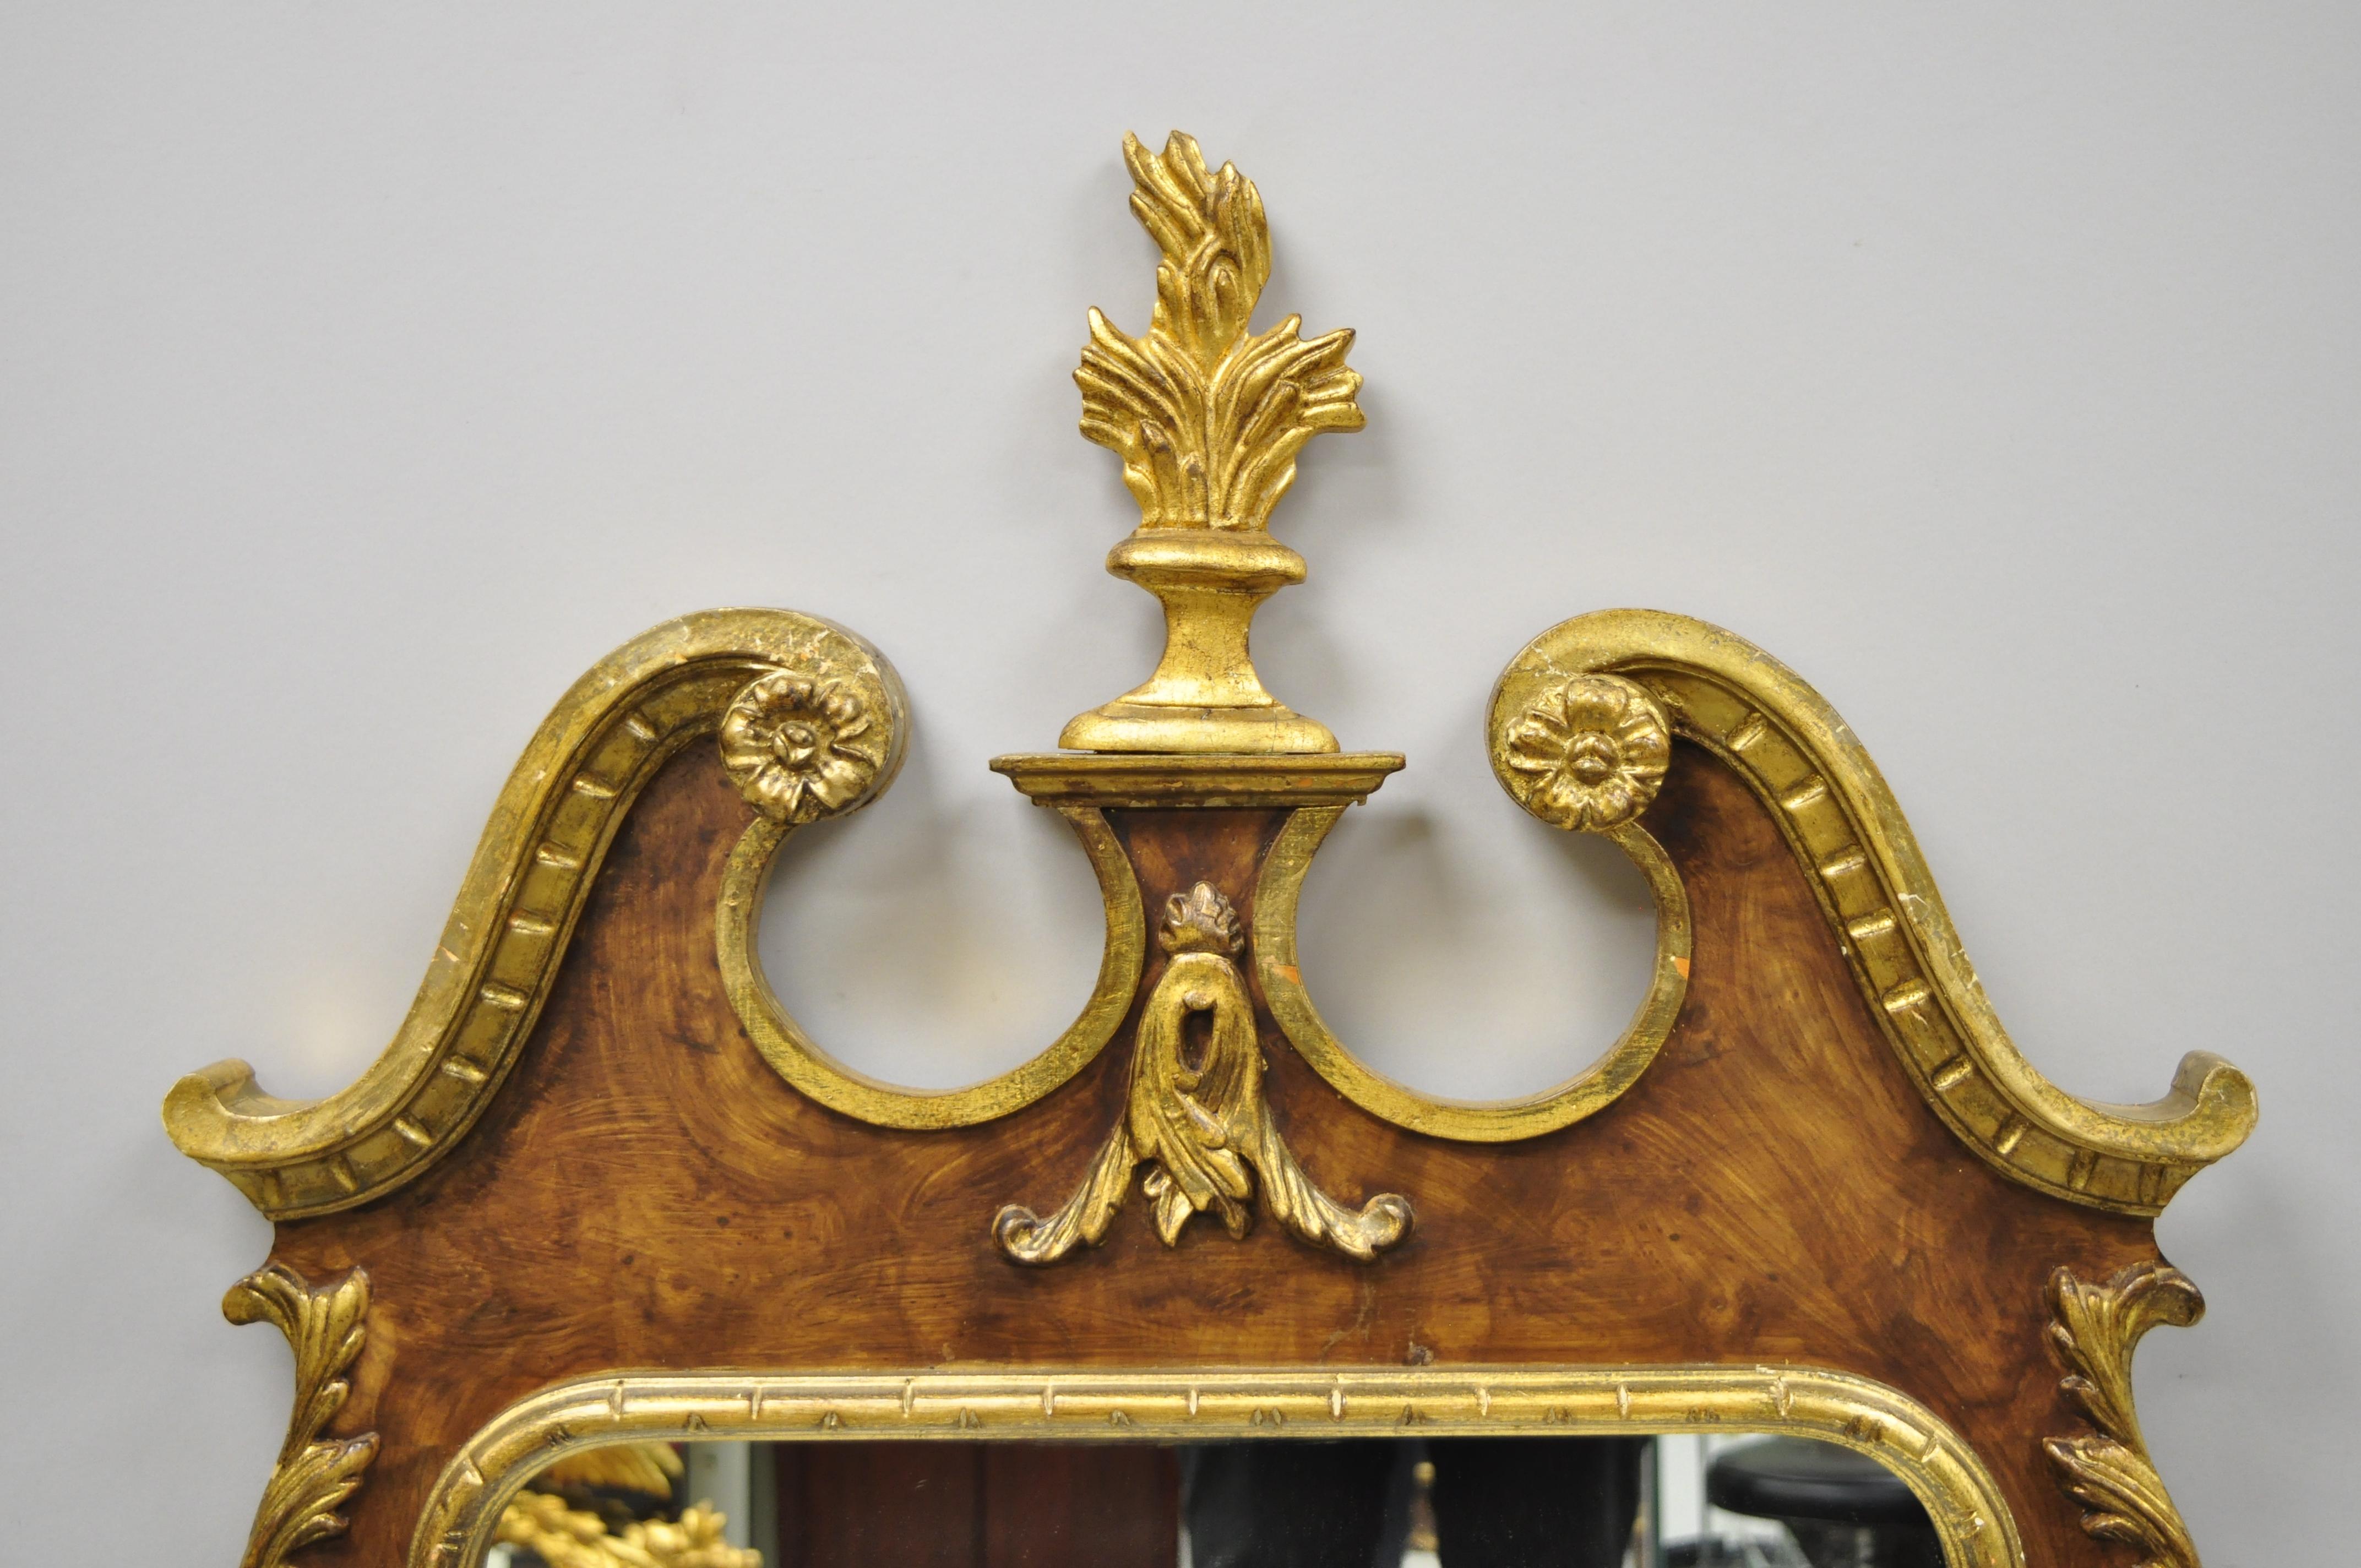 Carved wood American Federal style parcel-gilt wall mirror by Decorative Crafts Inc. Item features Gold gilt and brown distress painted finish, carved finials, solid wood frame, nicely carved details, original label, great style and form, circa late